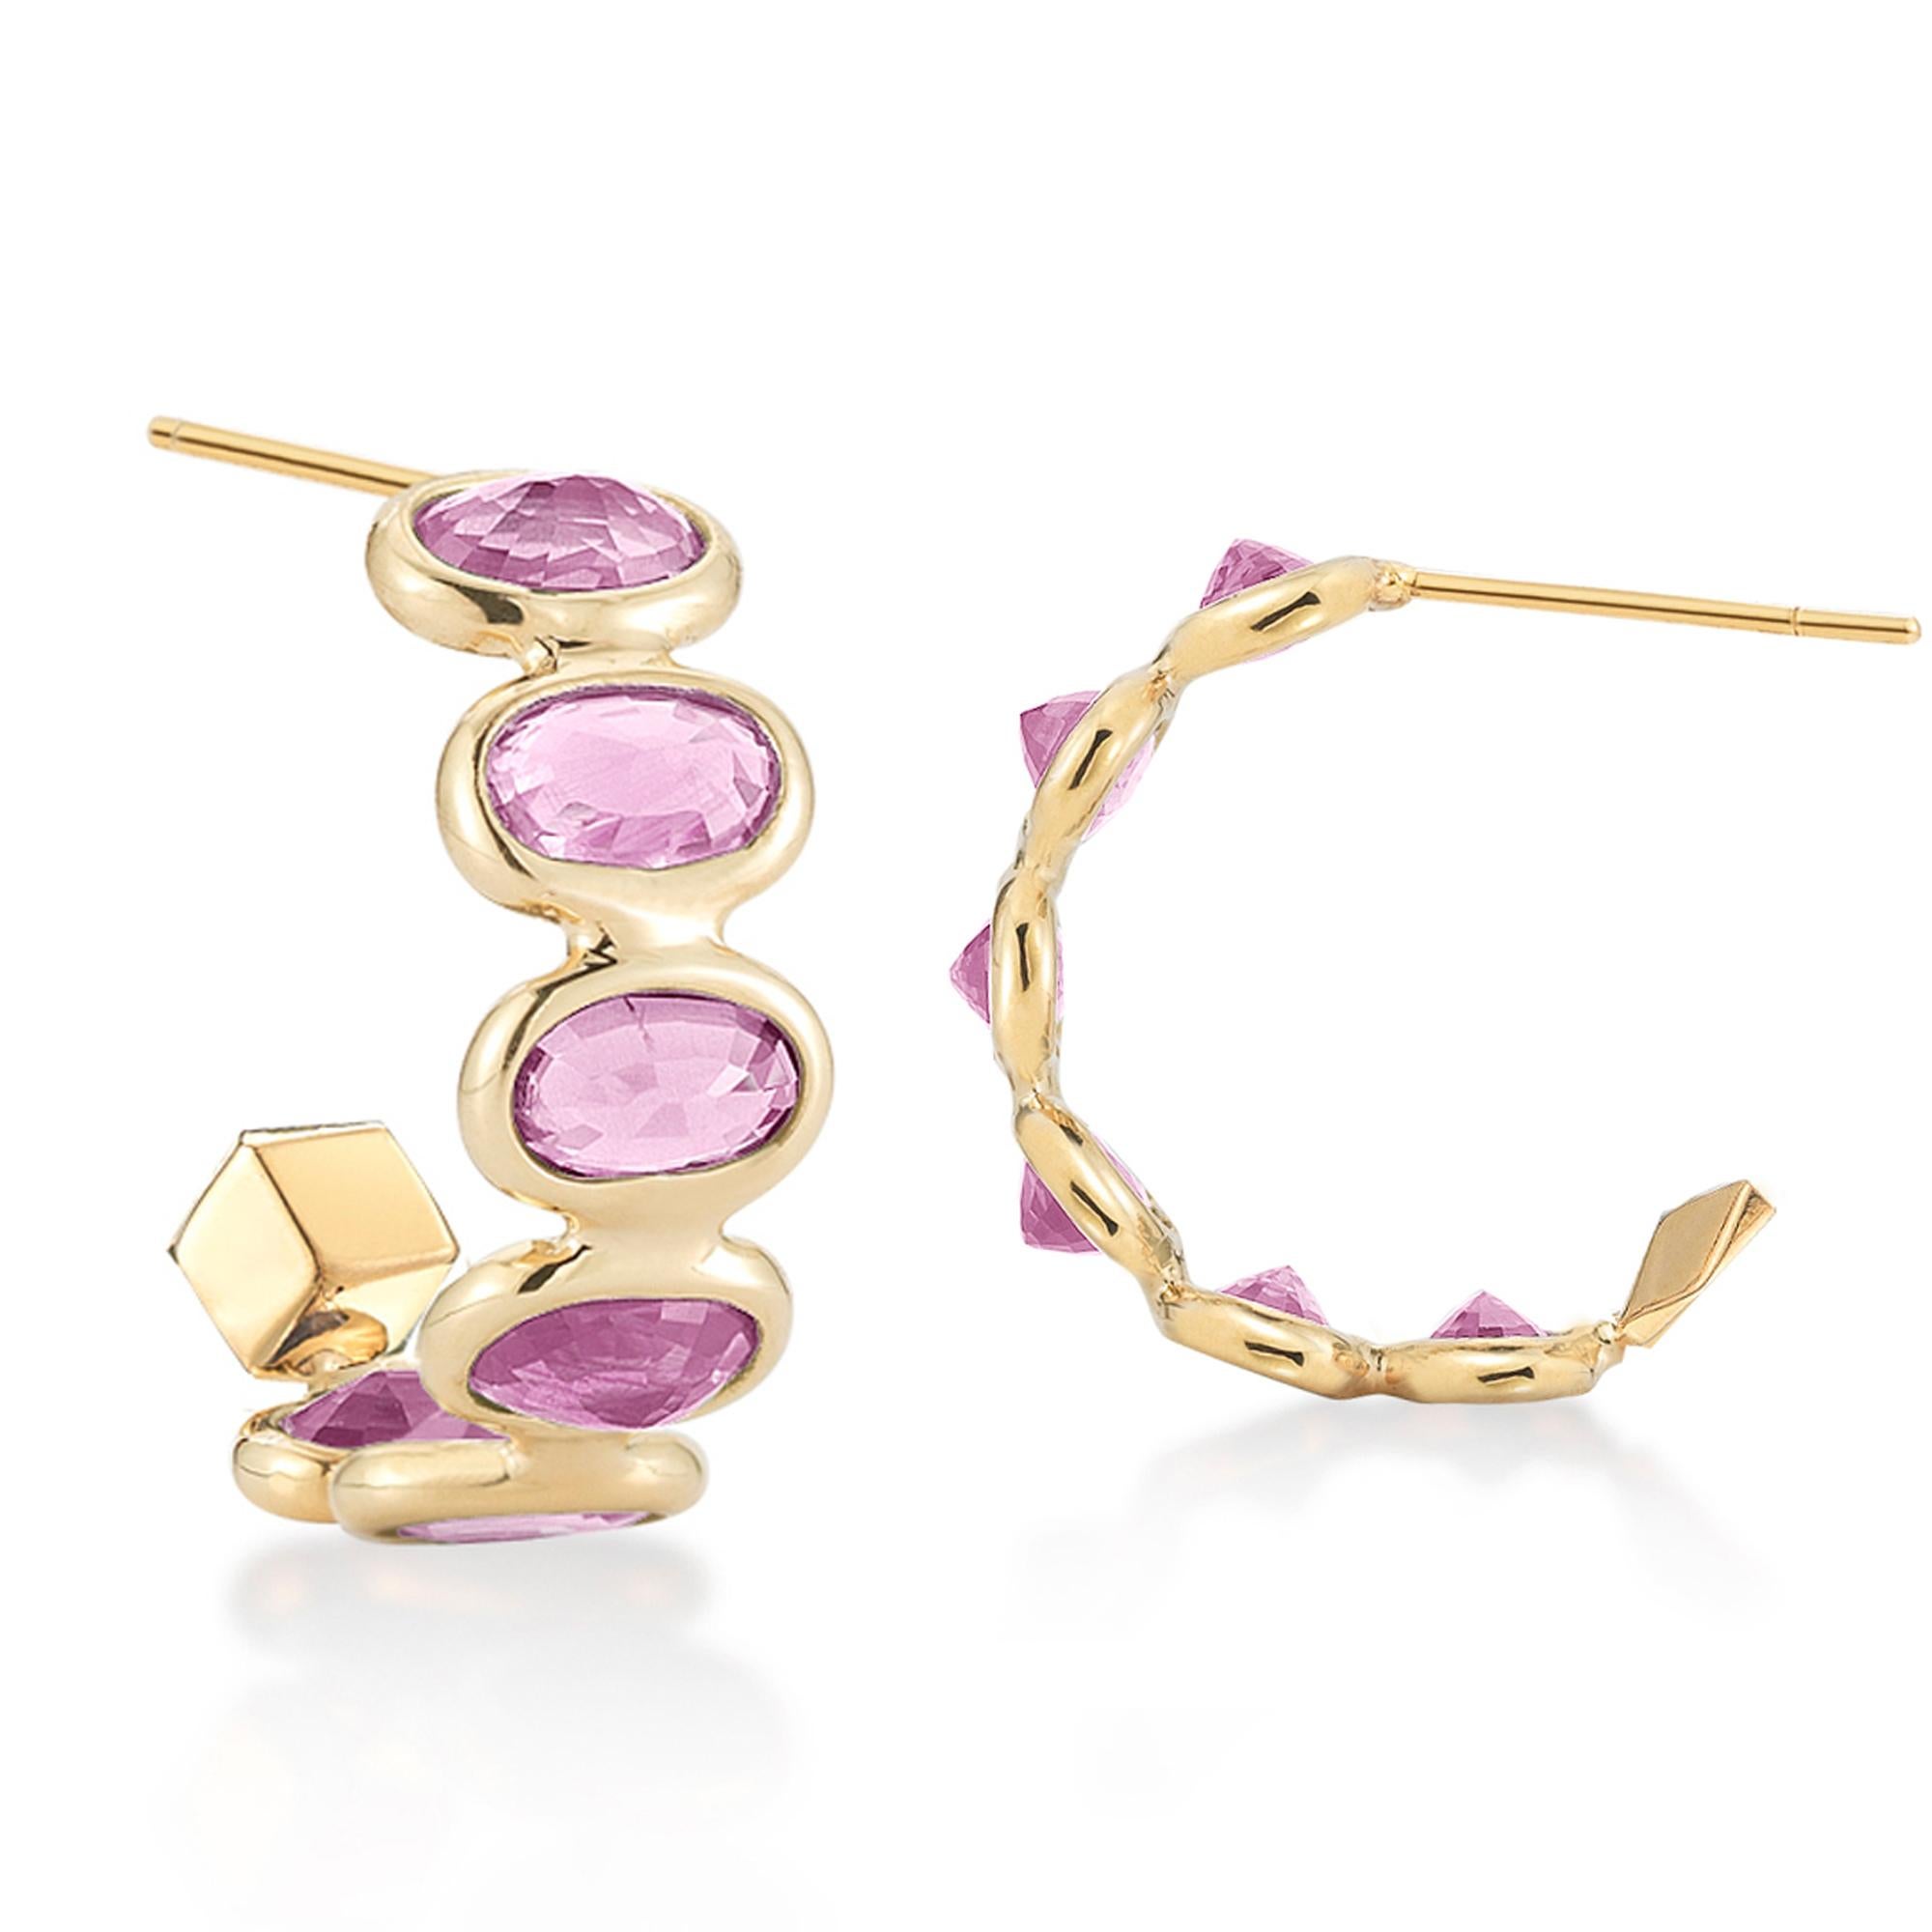 18kt yellow gold Ombré earrings with bezel set multishade oval pink sapphires and signature Brillante® motif, petite.

Reimagined from summers spent at the Tuscan shore, the Ombré collection highlights the diverse hues and textures found in